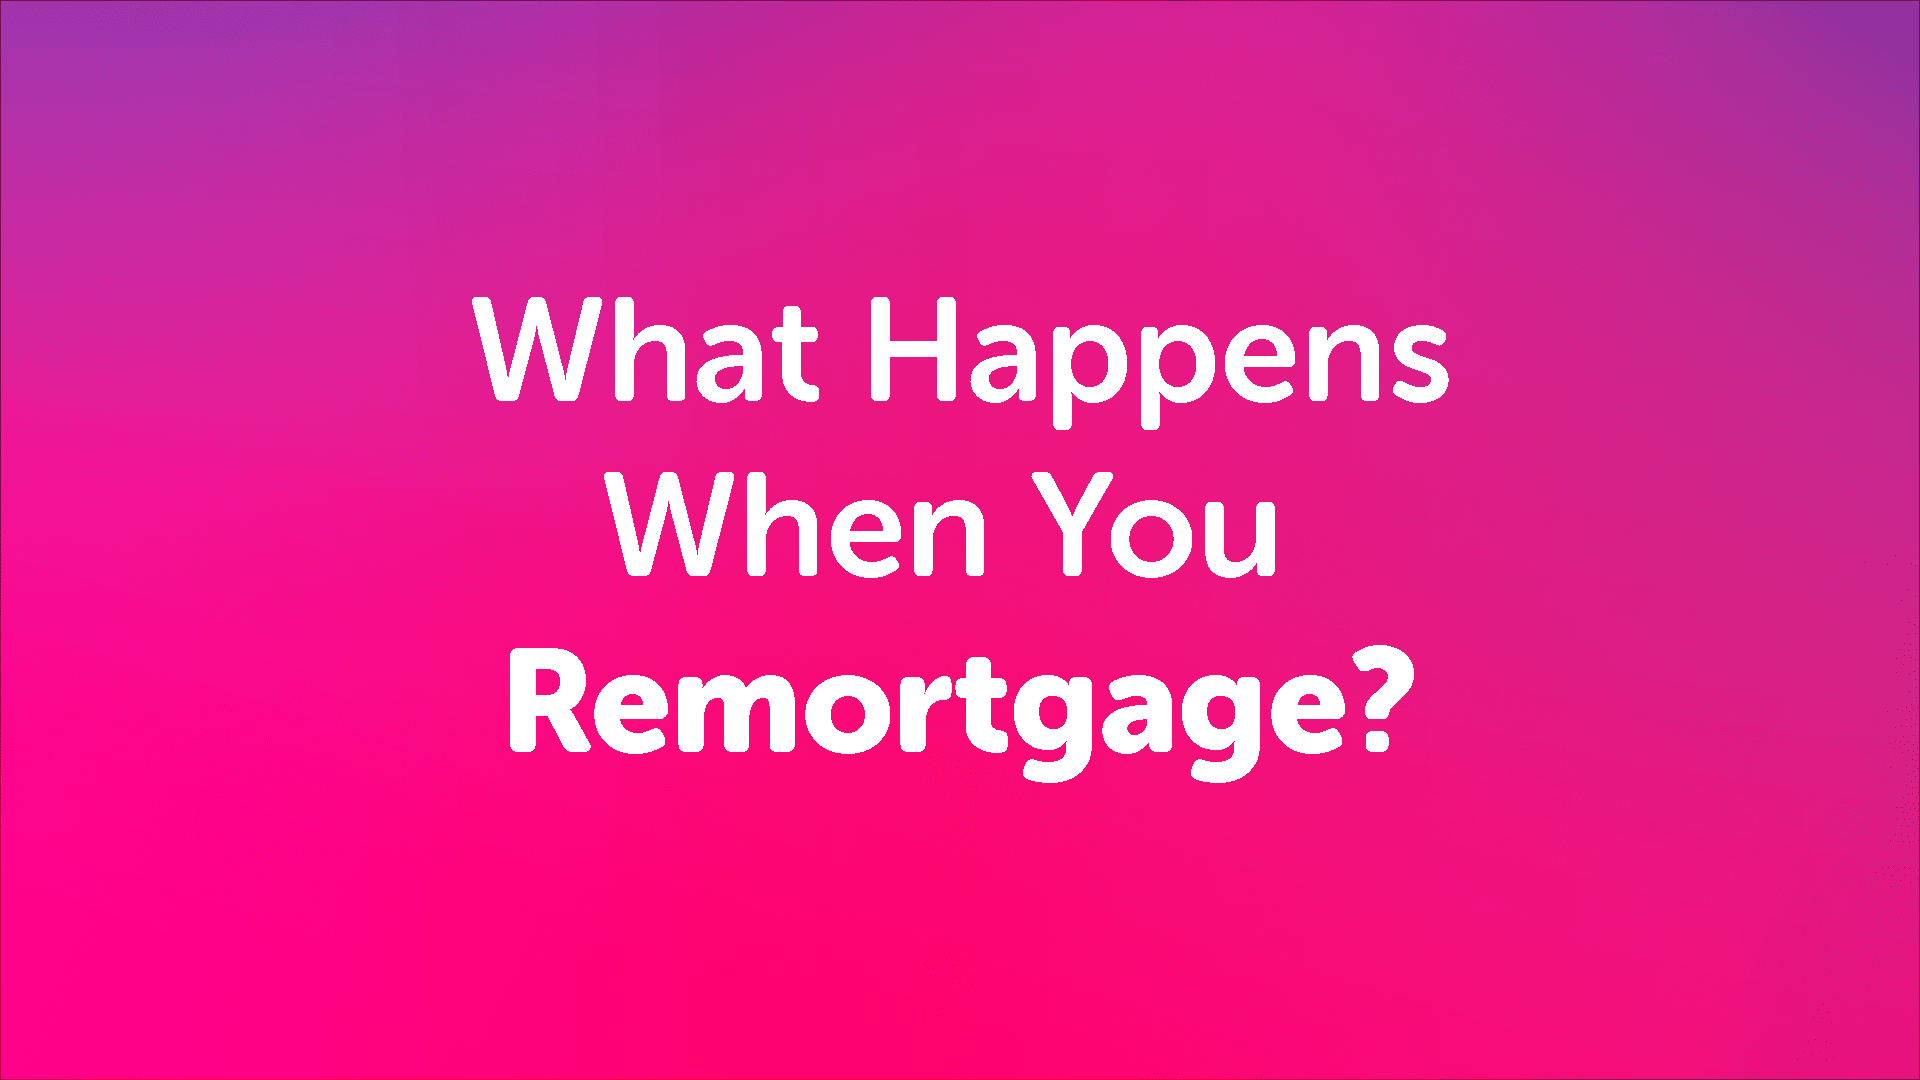 What Happens When You Remortgage